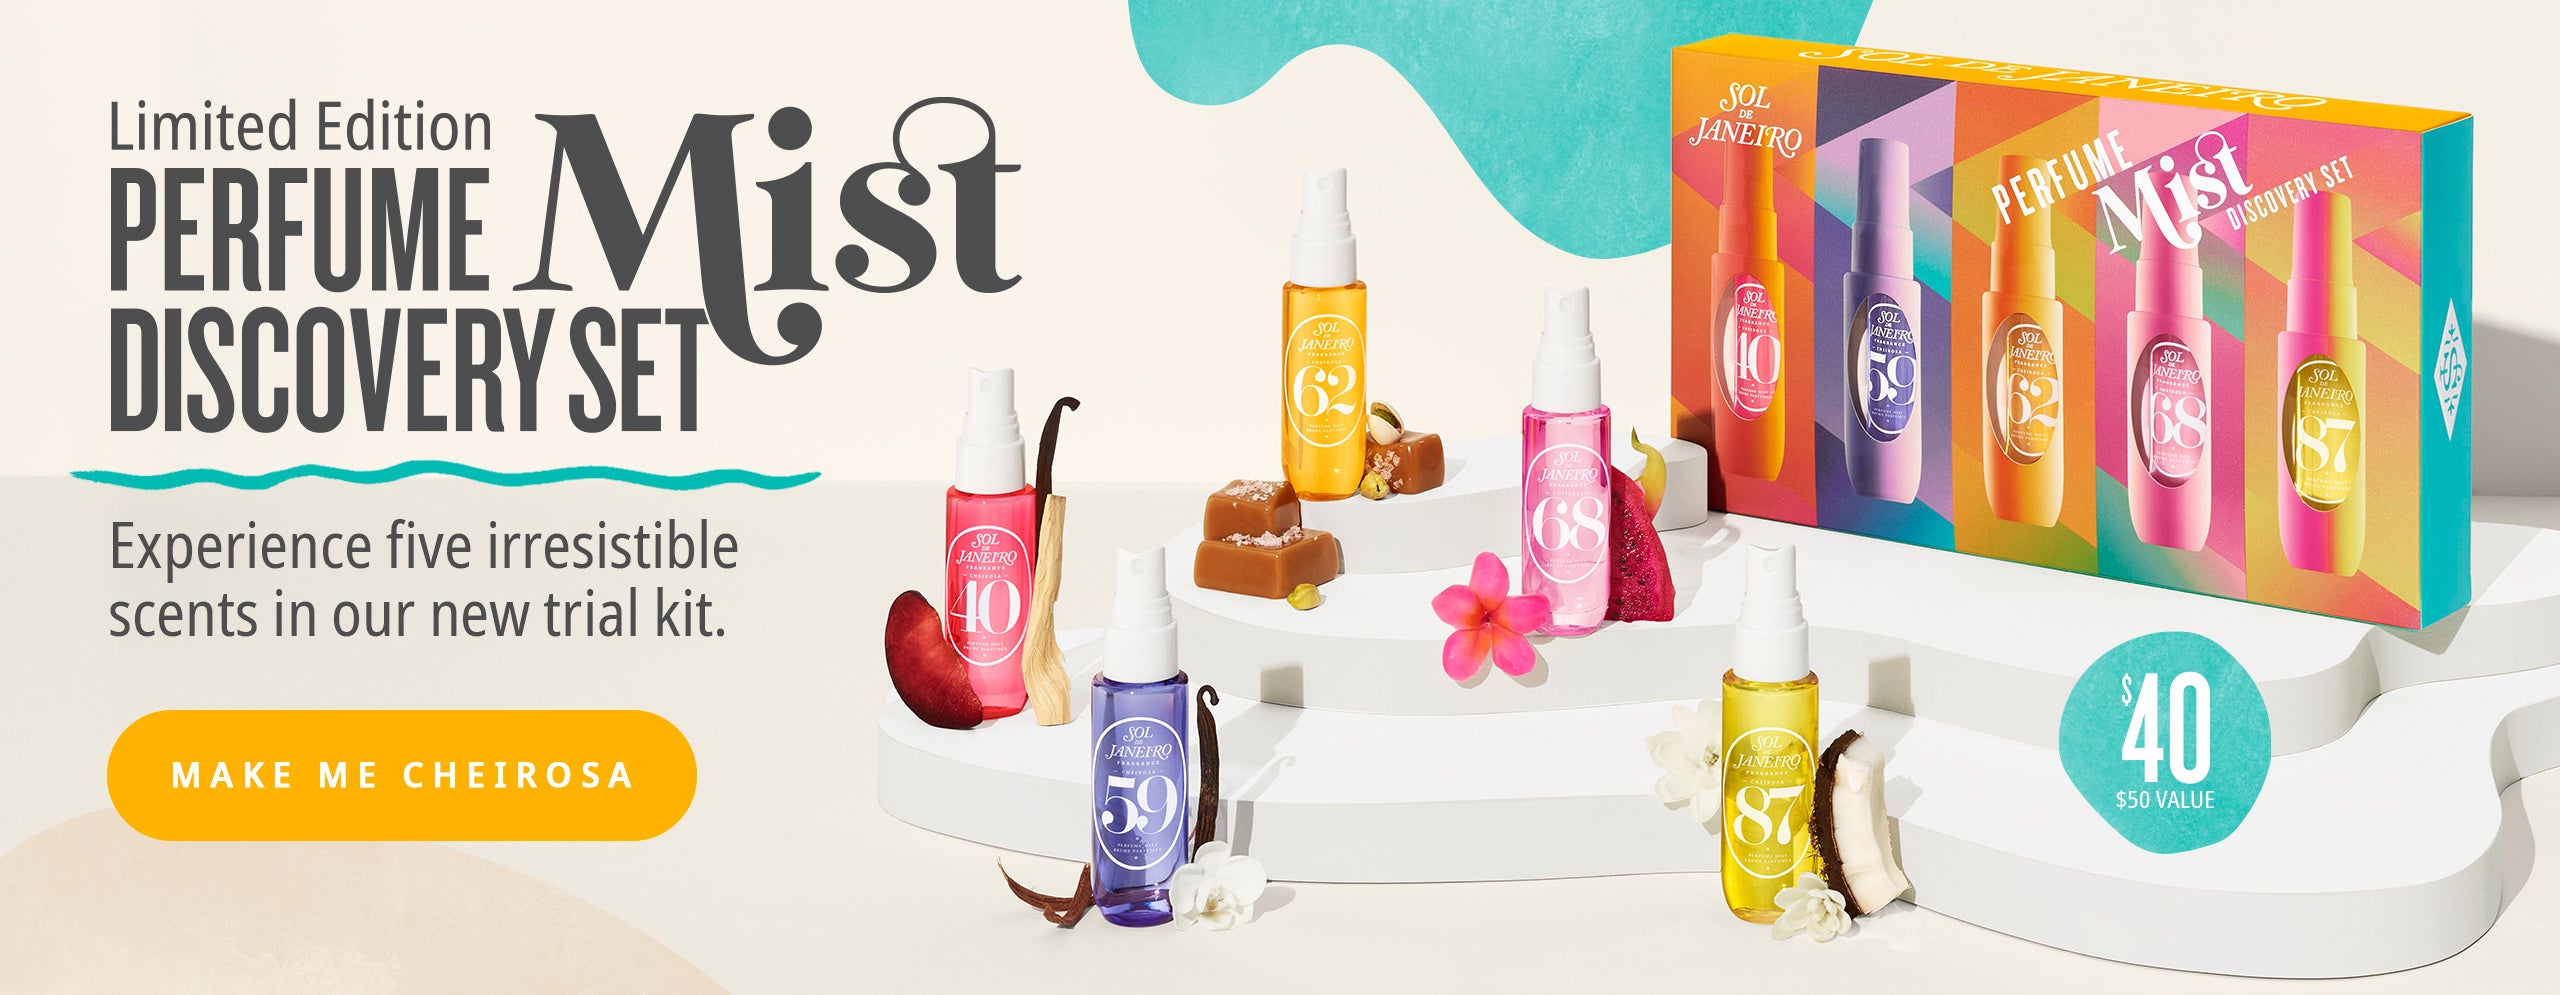 Limited edition perfume mist discovery set. Experience five irresistible scents in our new trial kit. Make me cheirosa!